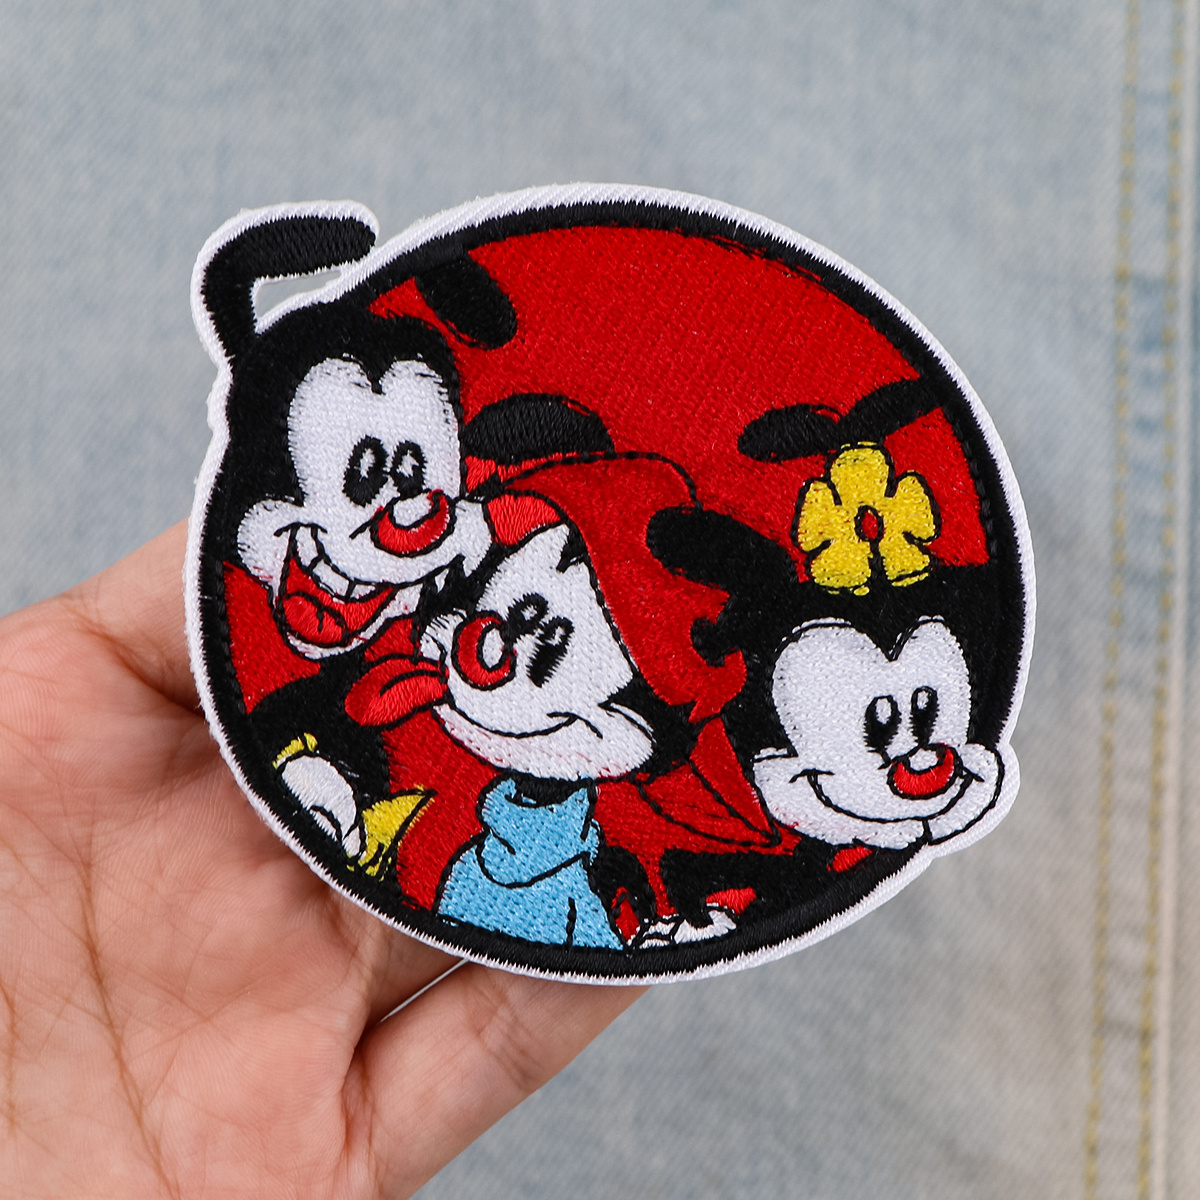 15pcs/set Cartoon Iron On Patches, Sew On/Iron On Embroidered Patch  Applique For Men's T-Shirts, Jeans, Hats, Bags